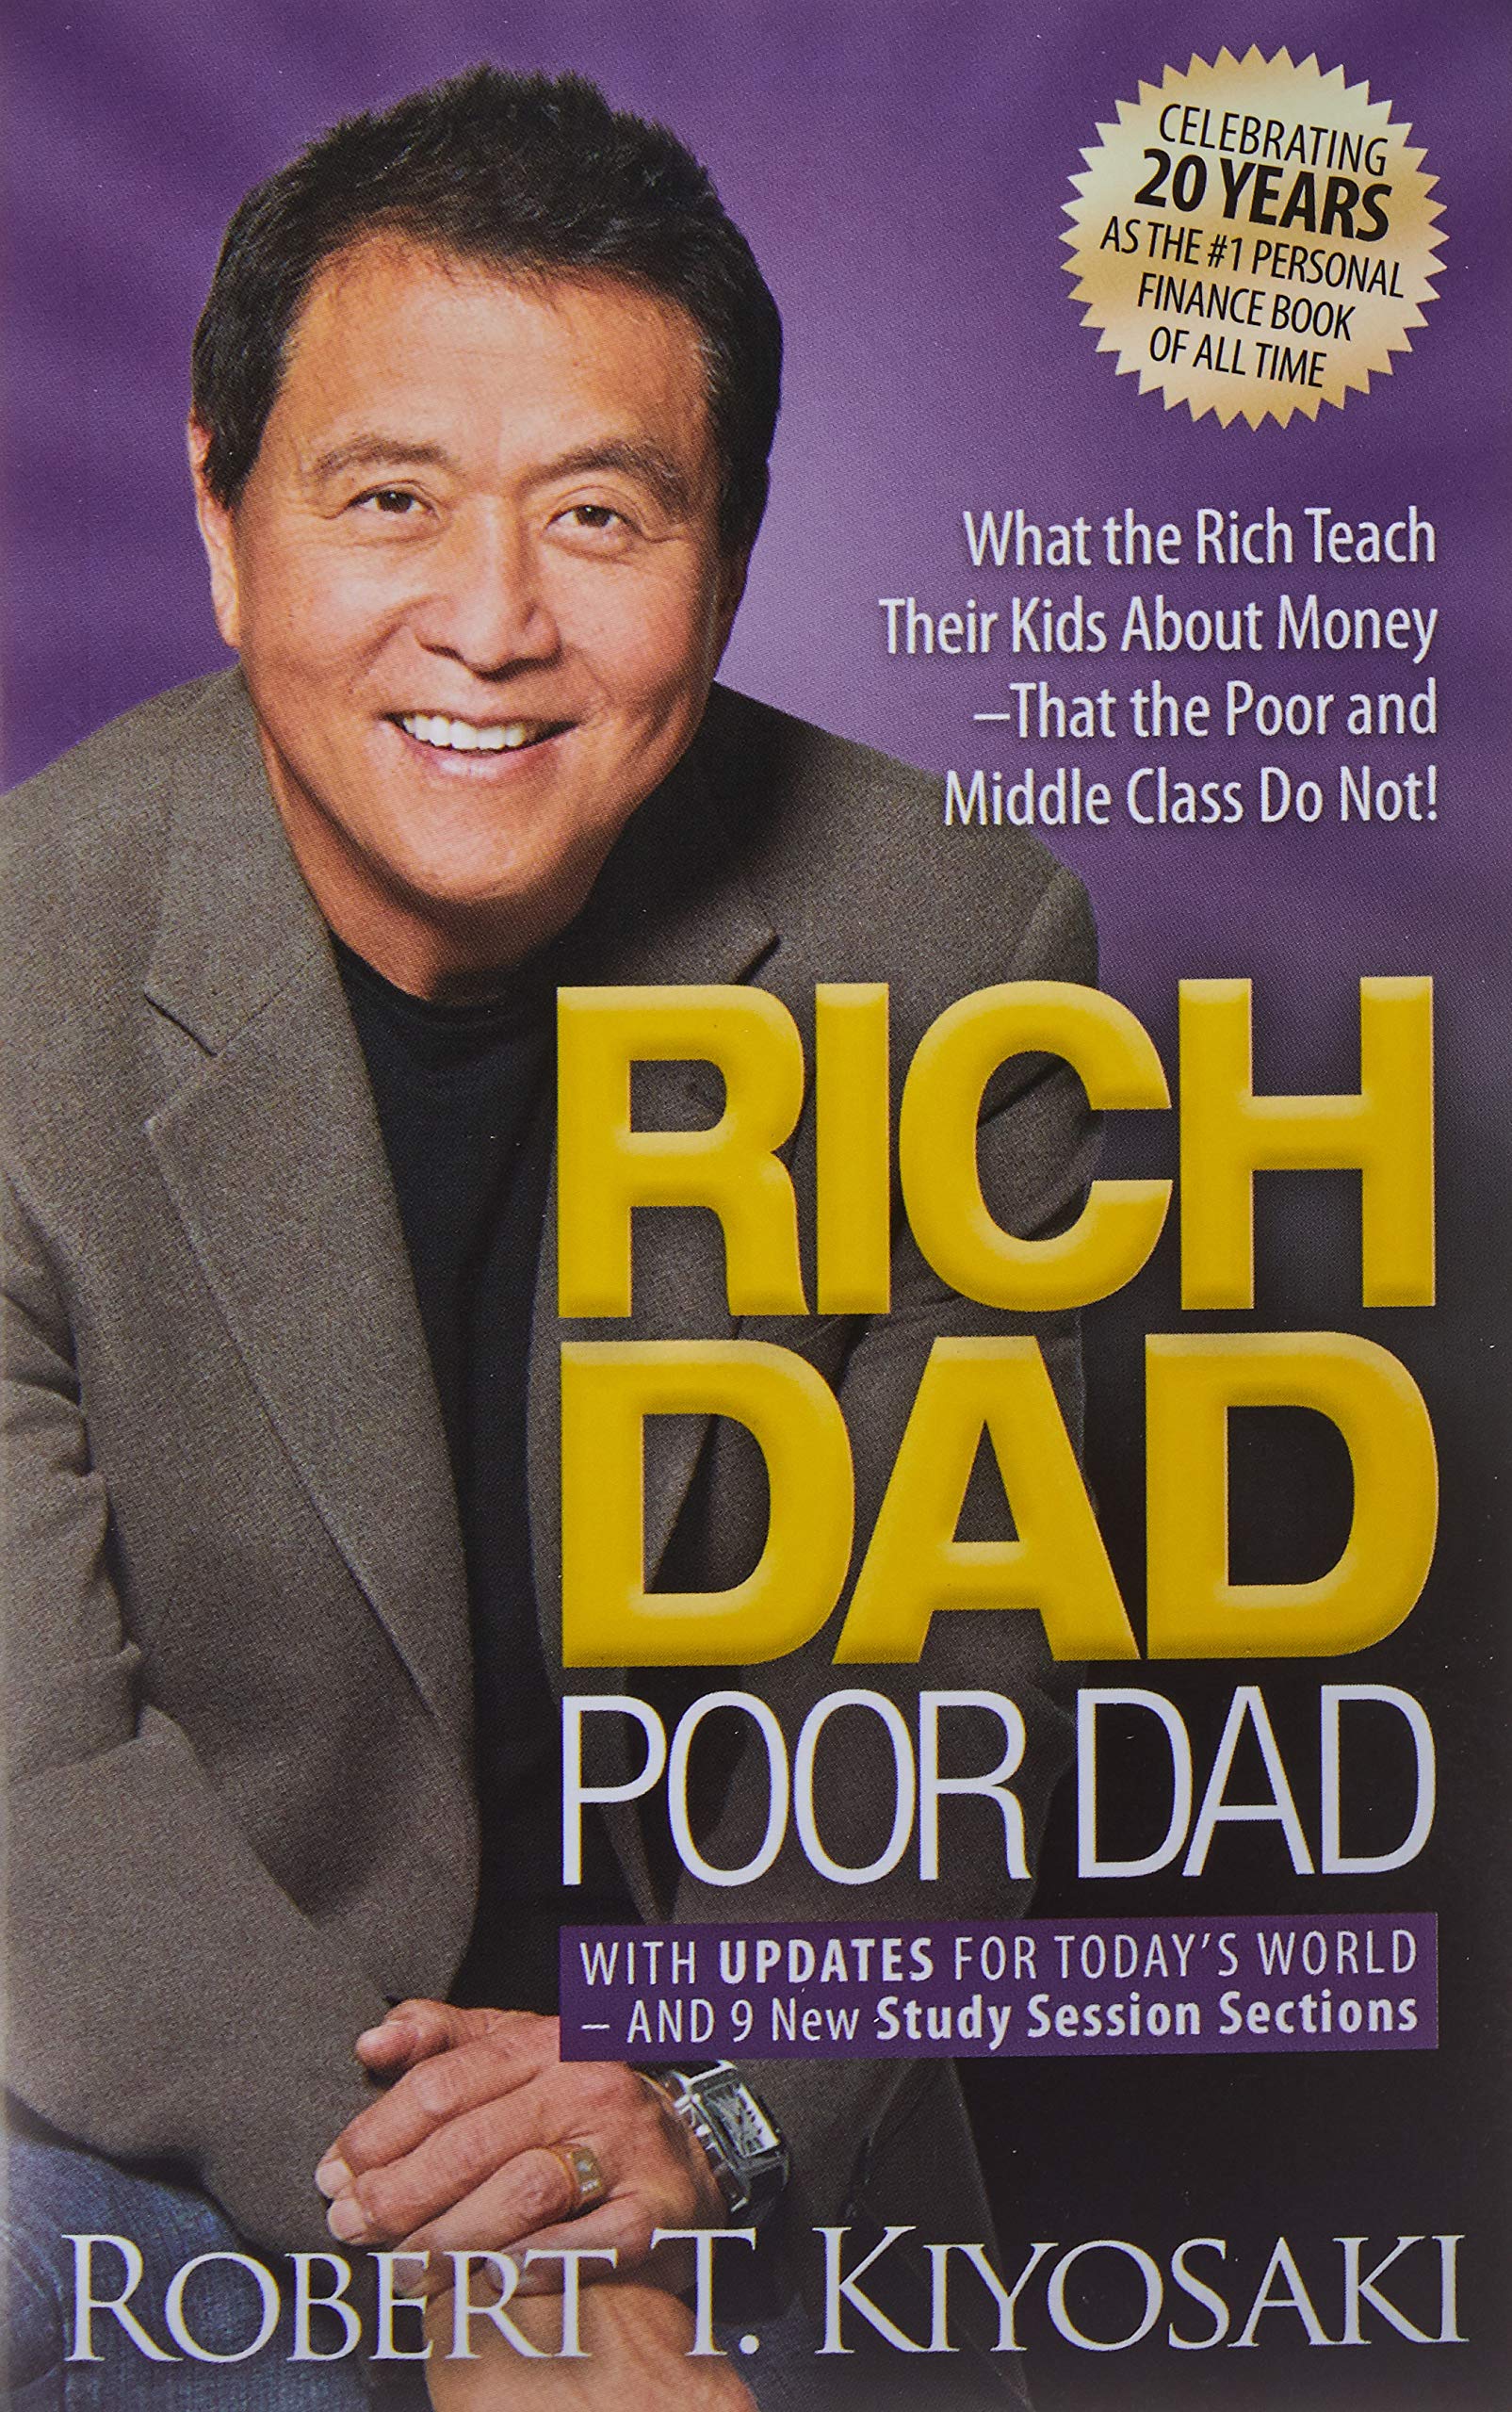 Rich Dad Poor Dad: What the Rich Teach Their Kids About Money That the Poor and Middle Class Do Not!: Kiyosaki, Robert T.: 0884547133656: Books